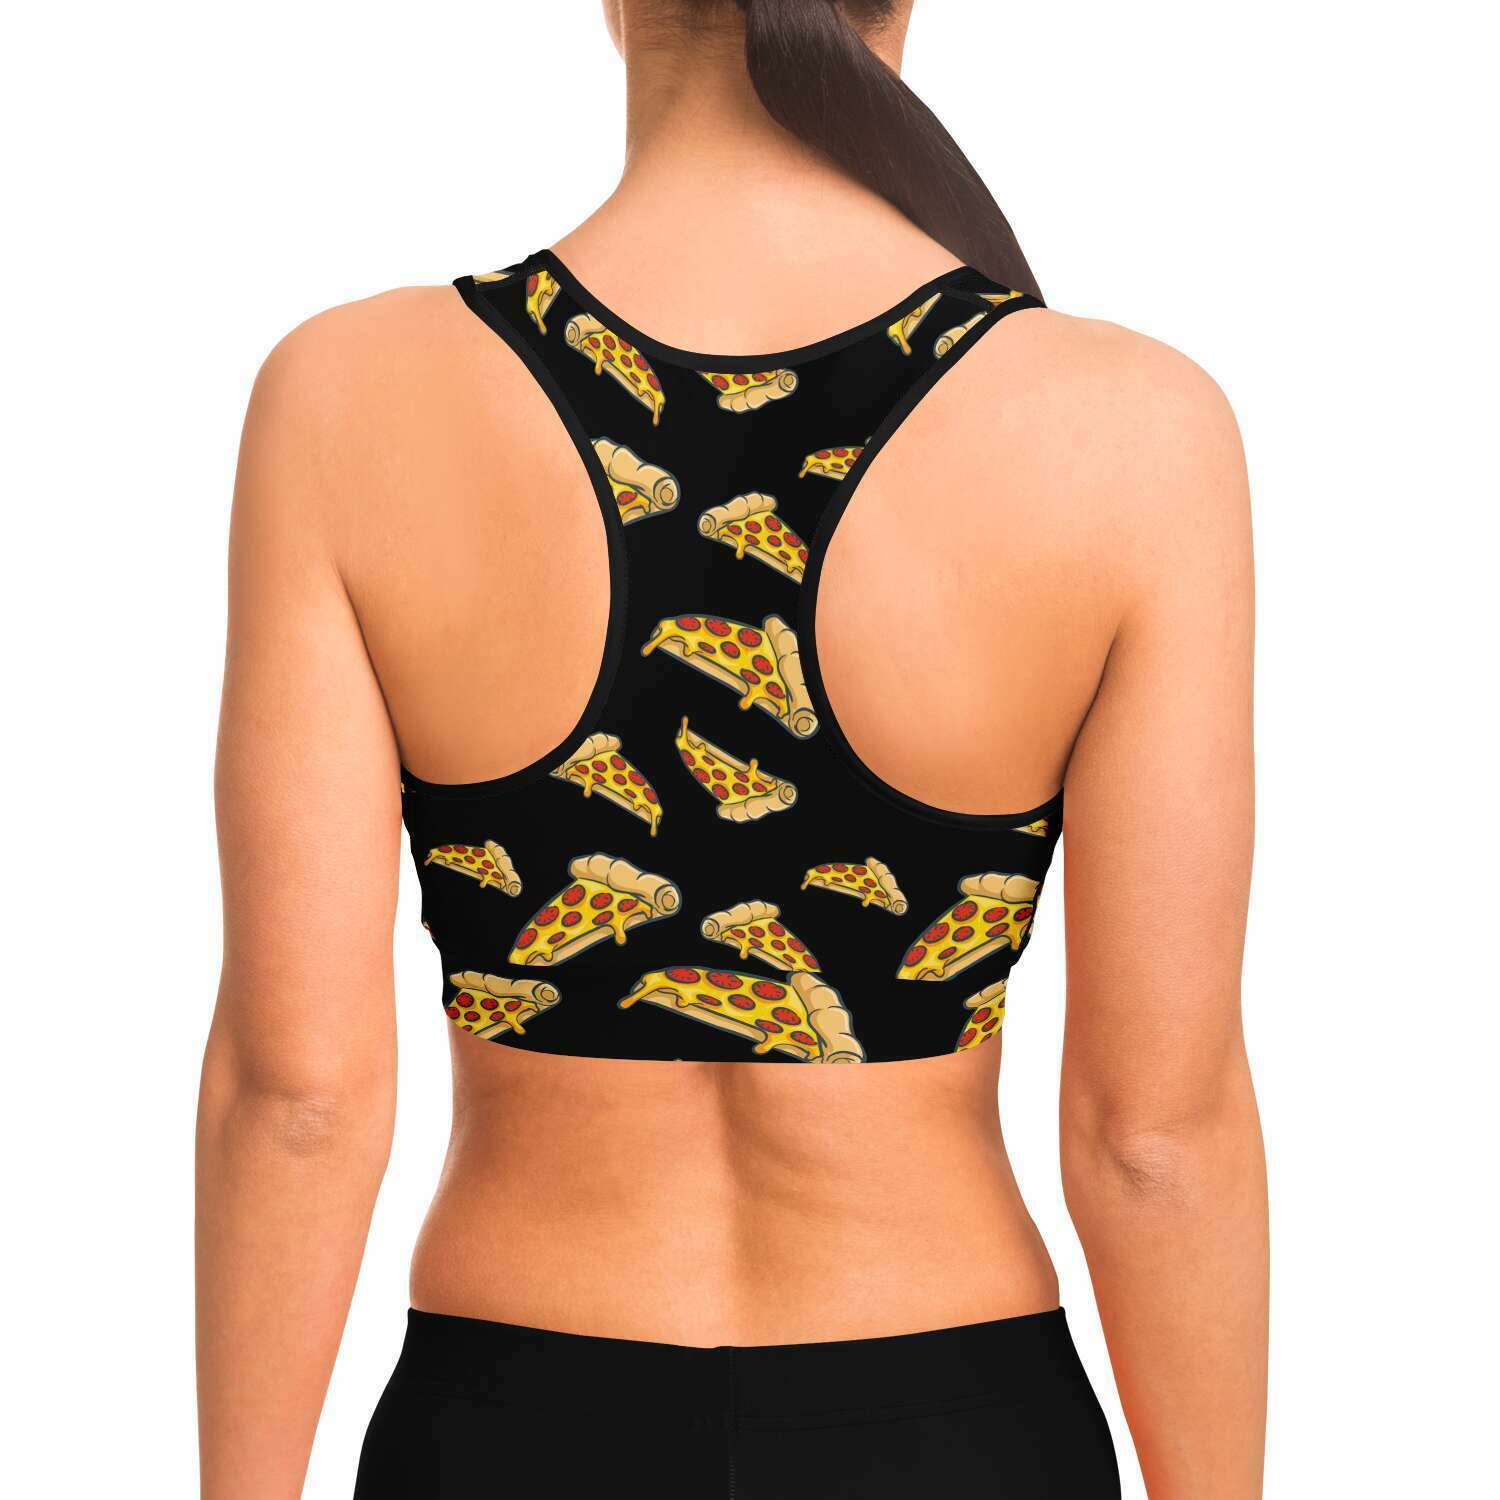 Women's Late Night Hot Pepperoni Pizza Party Athletic Sports Bra Model Back